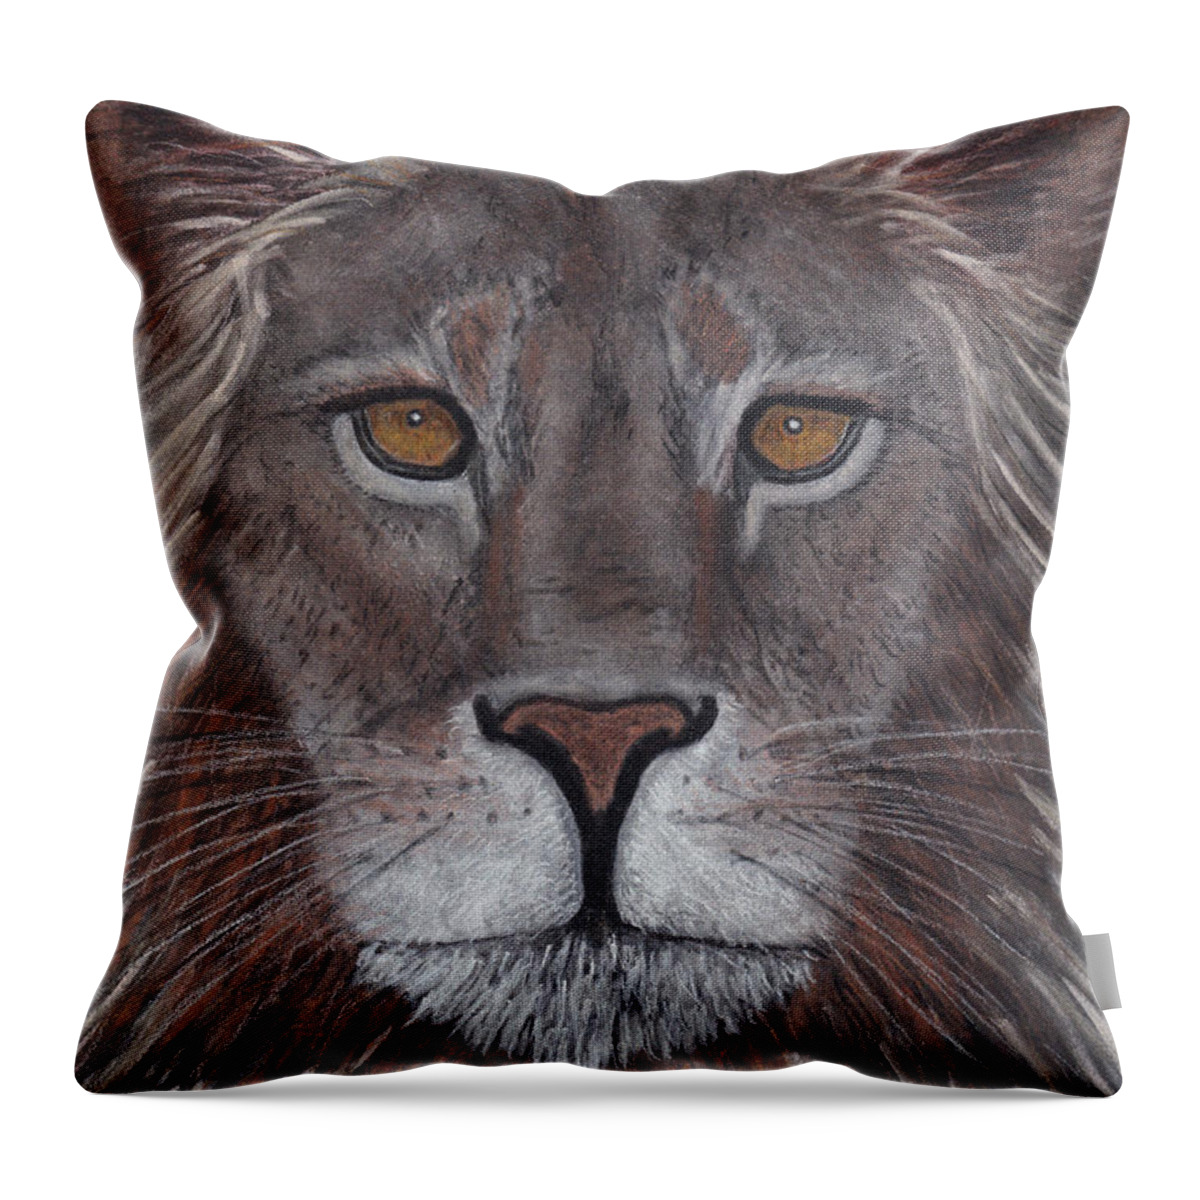 Lion Throw Pillow featuring the drawing Lion by Nicole I Hamilton